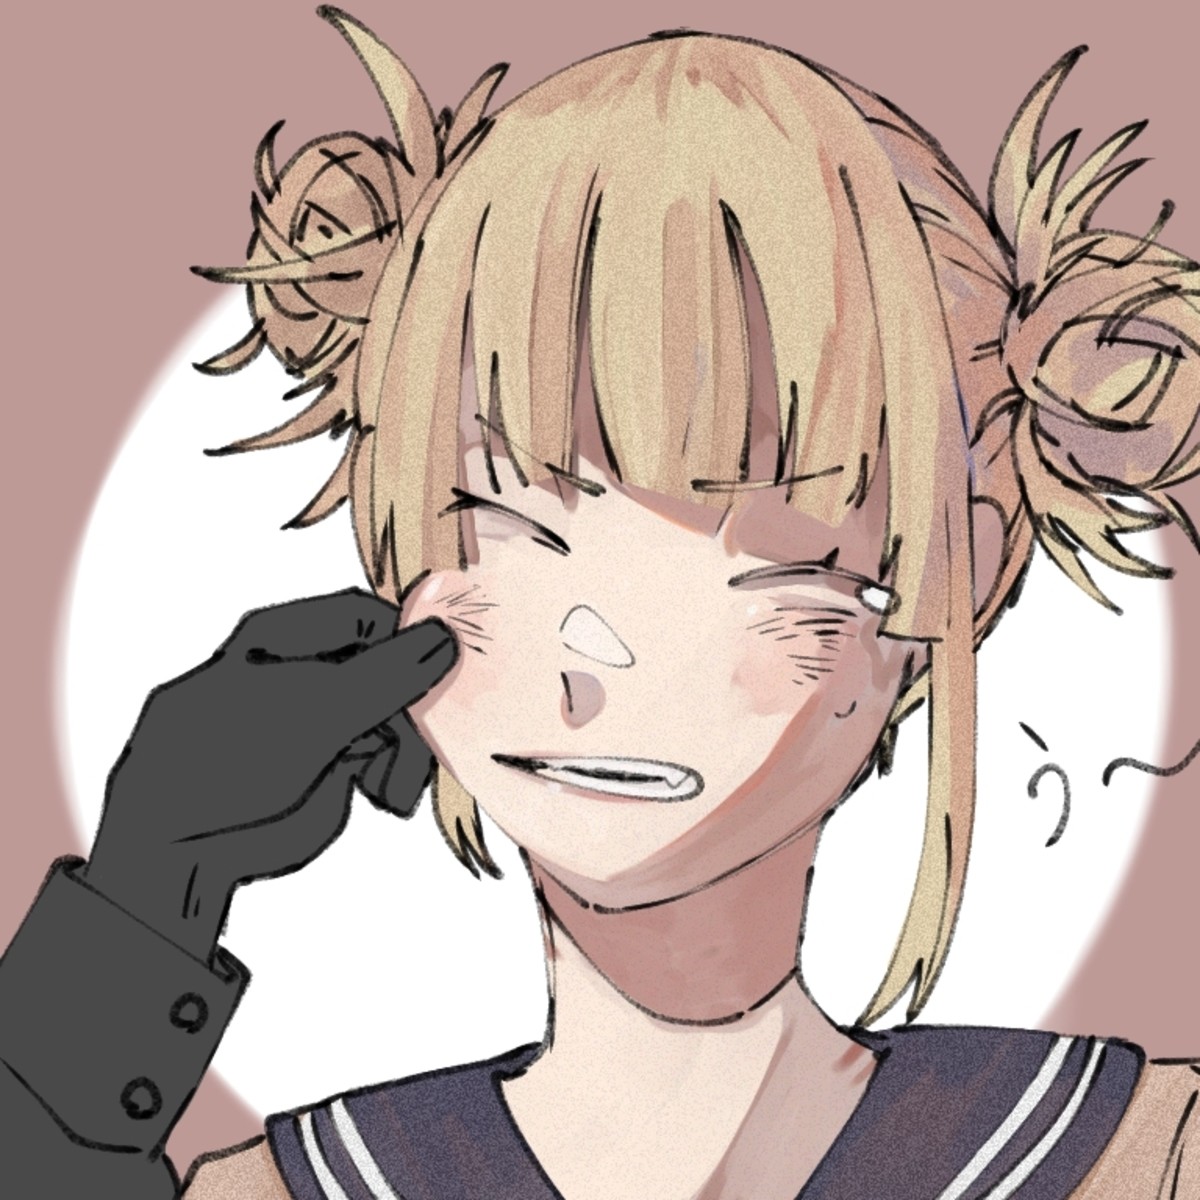 Daily Toga - 980: Pinch the girl. join list: DailyToga (477 subs)Mention History Source: .. Blacksmithpanzer